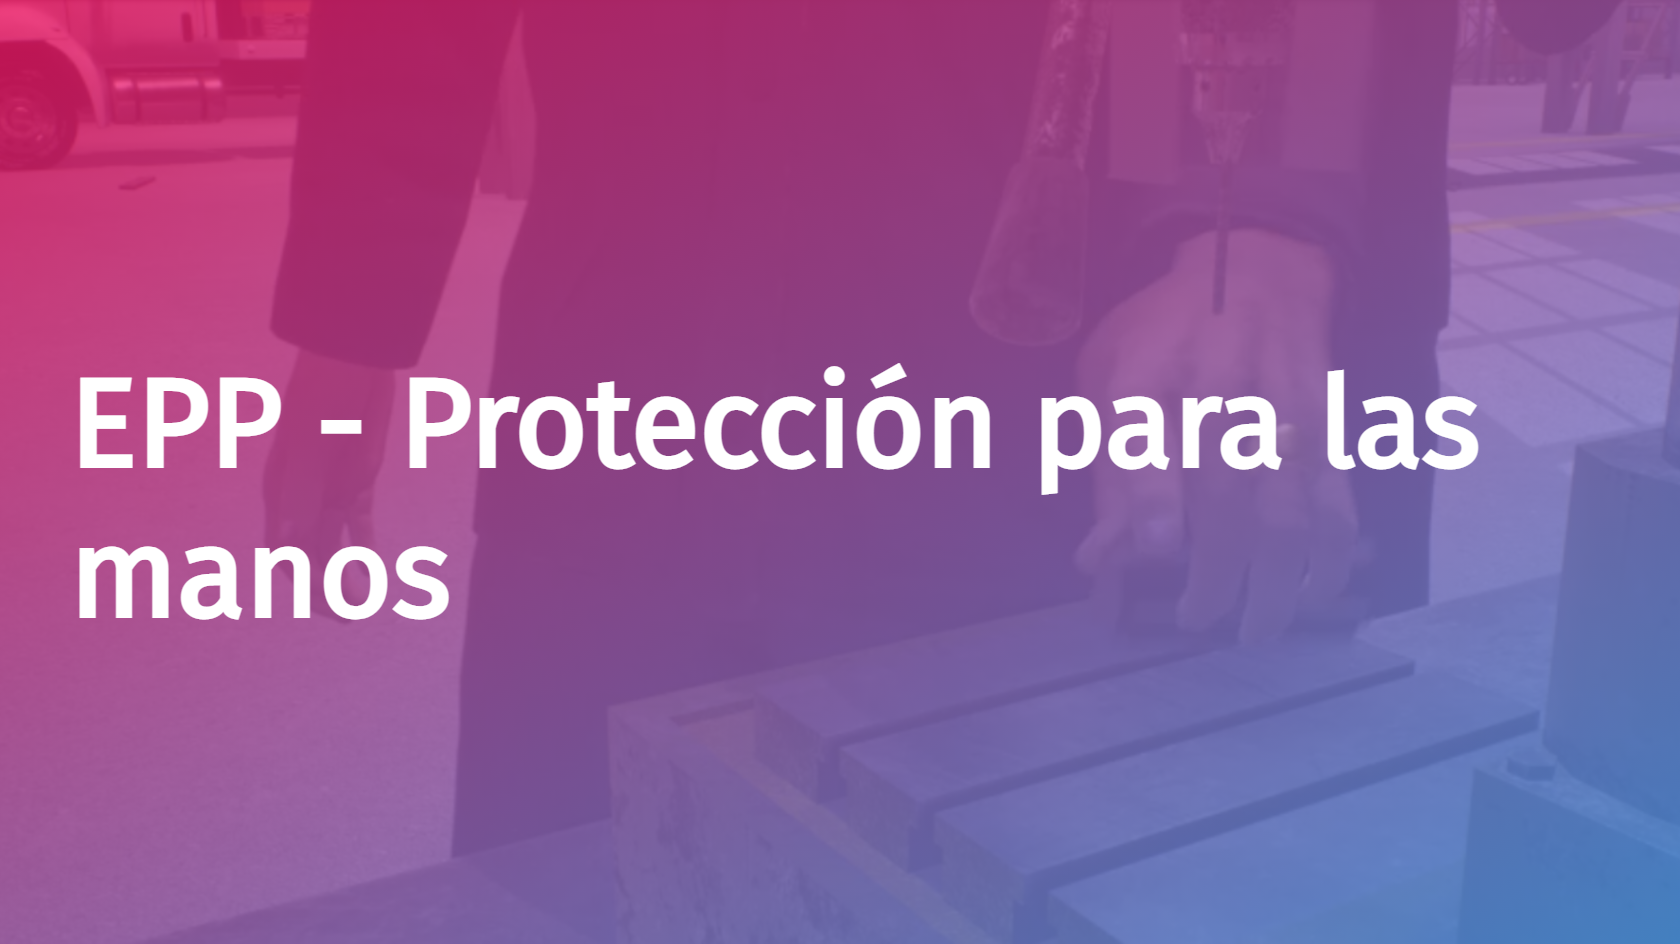 Spanish - PPE - Hand Protection